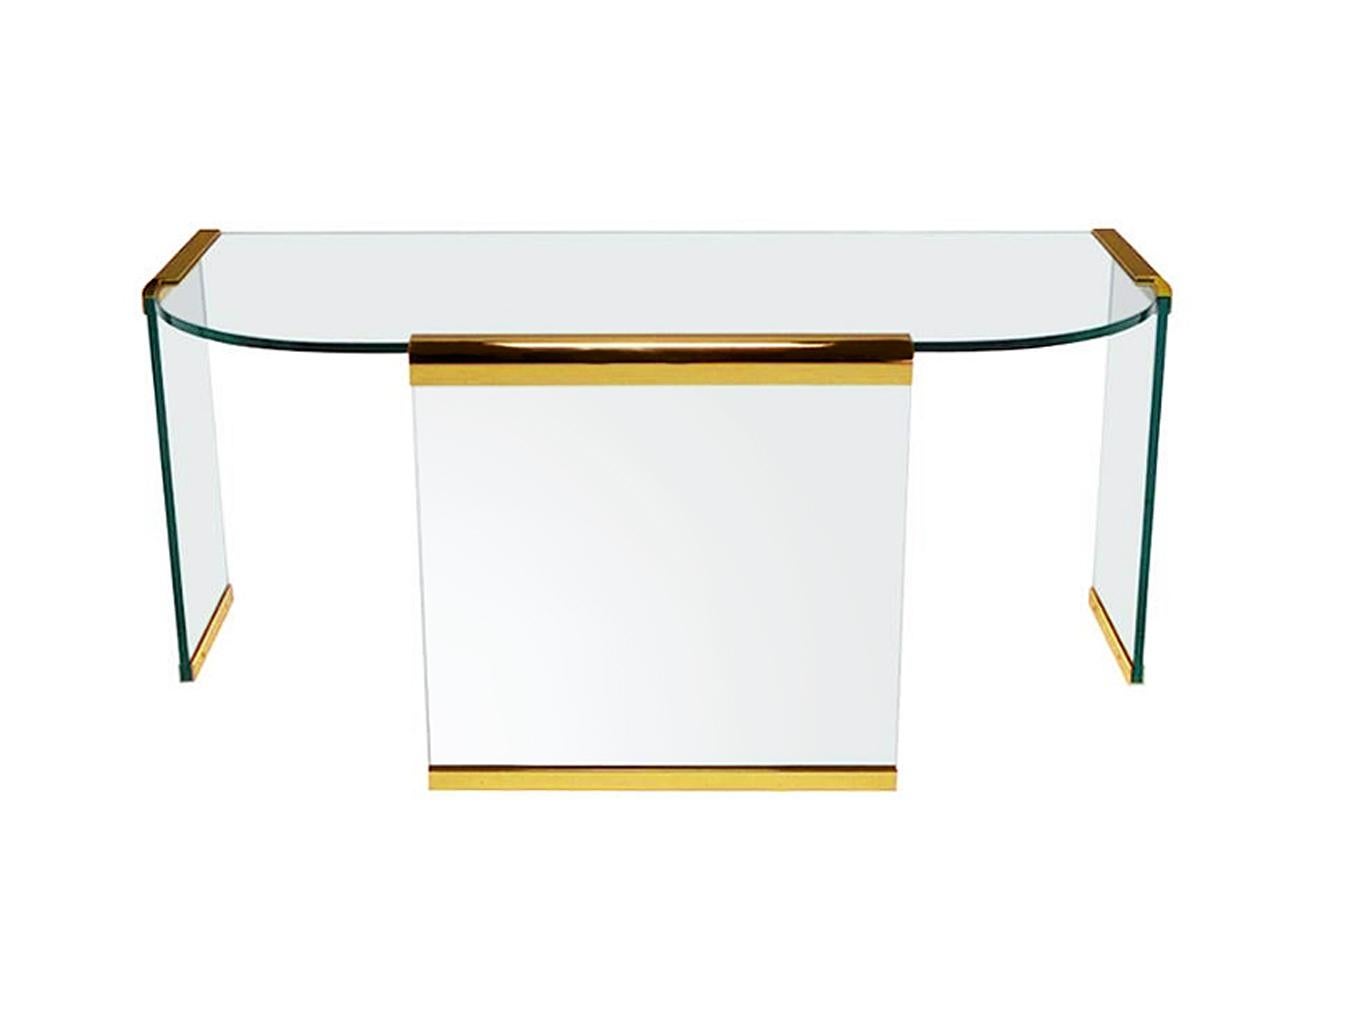 A chic and substantial glass and brass table or desk designed by Leon Rosen for Pace collection. This desk feature heavy thick 3/4 inch glass with solid brass brackets.